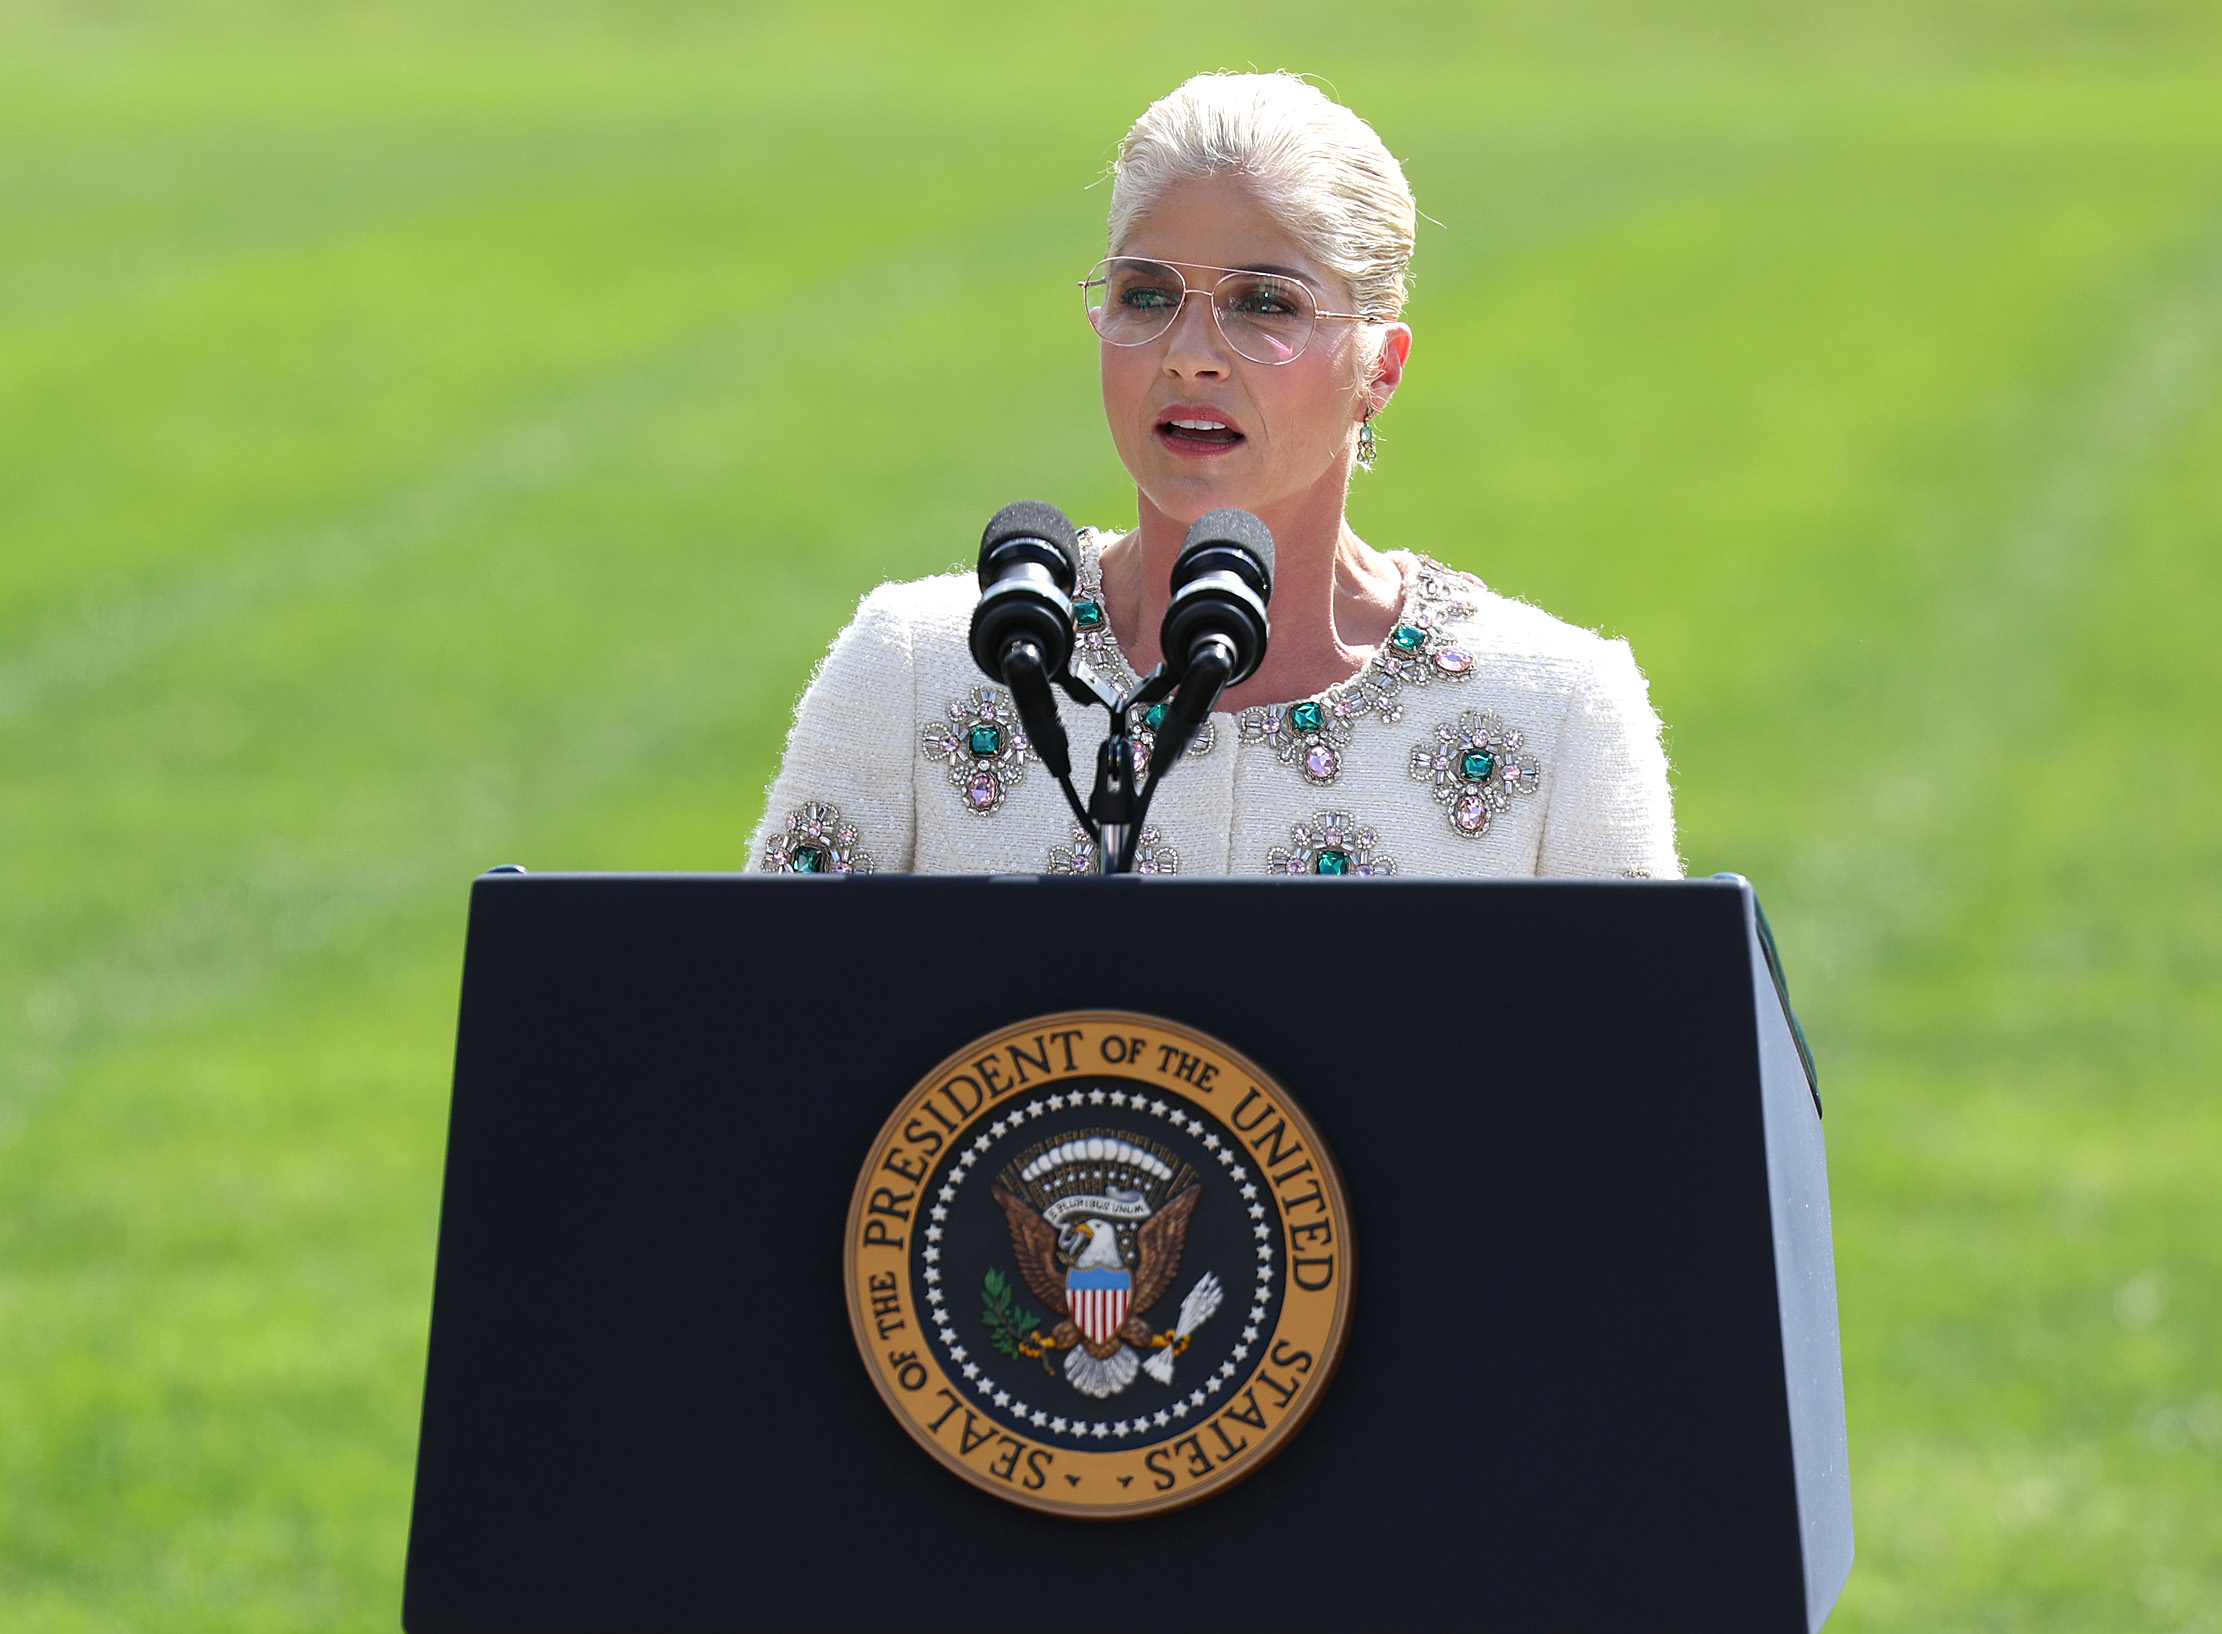 Selma in embellished outfit speaks at presidential podium outdoors